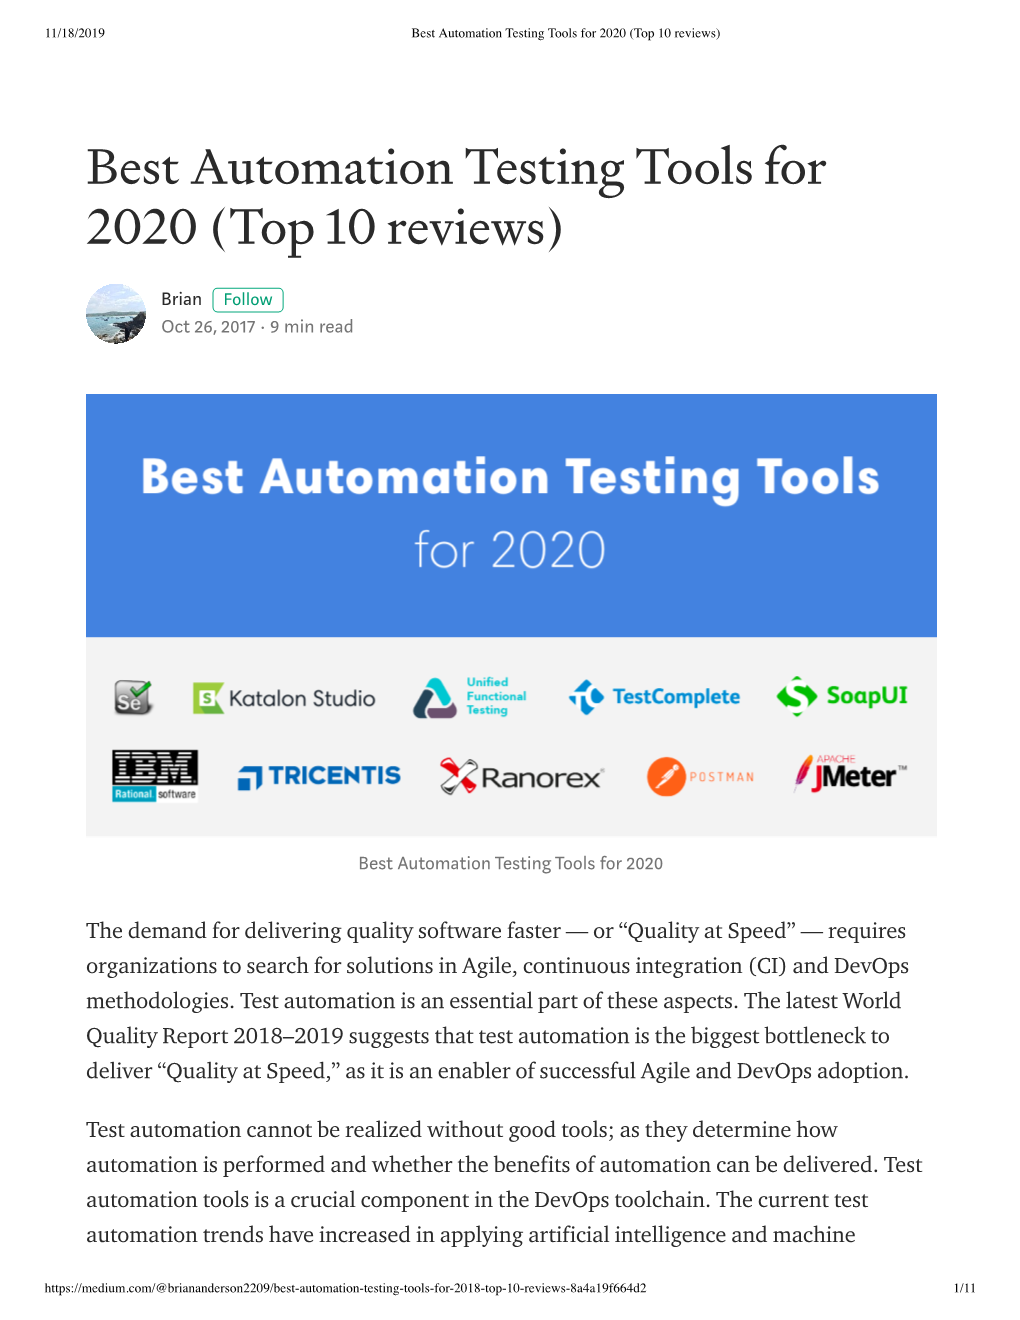 Best Automation Testing Tools for 2020 (Top 10 Reviews)